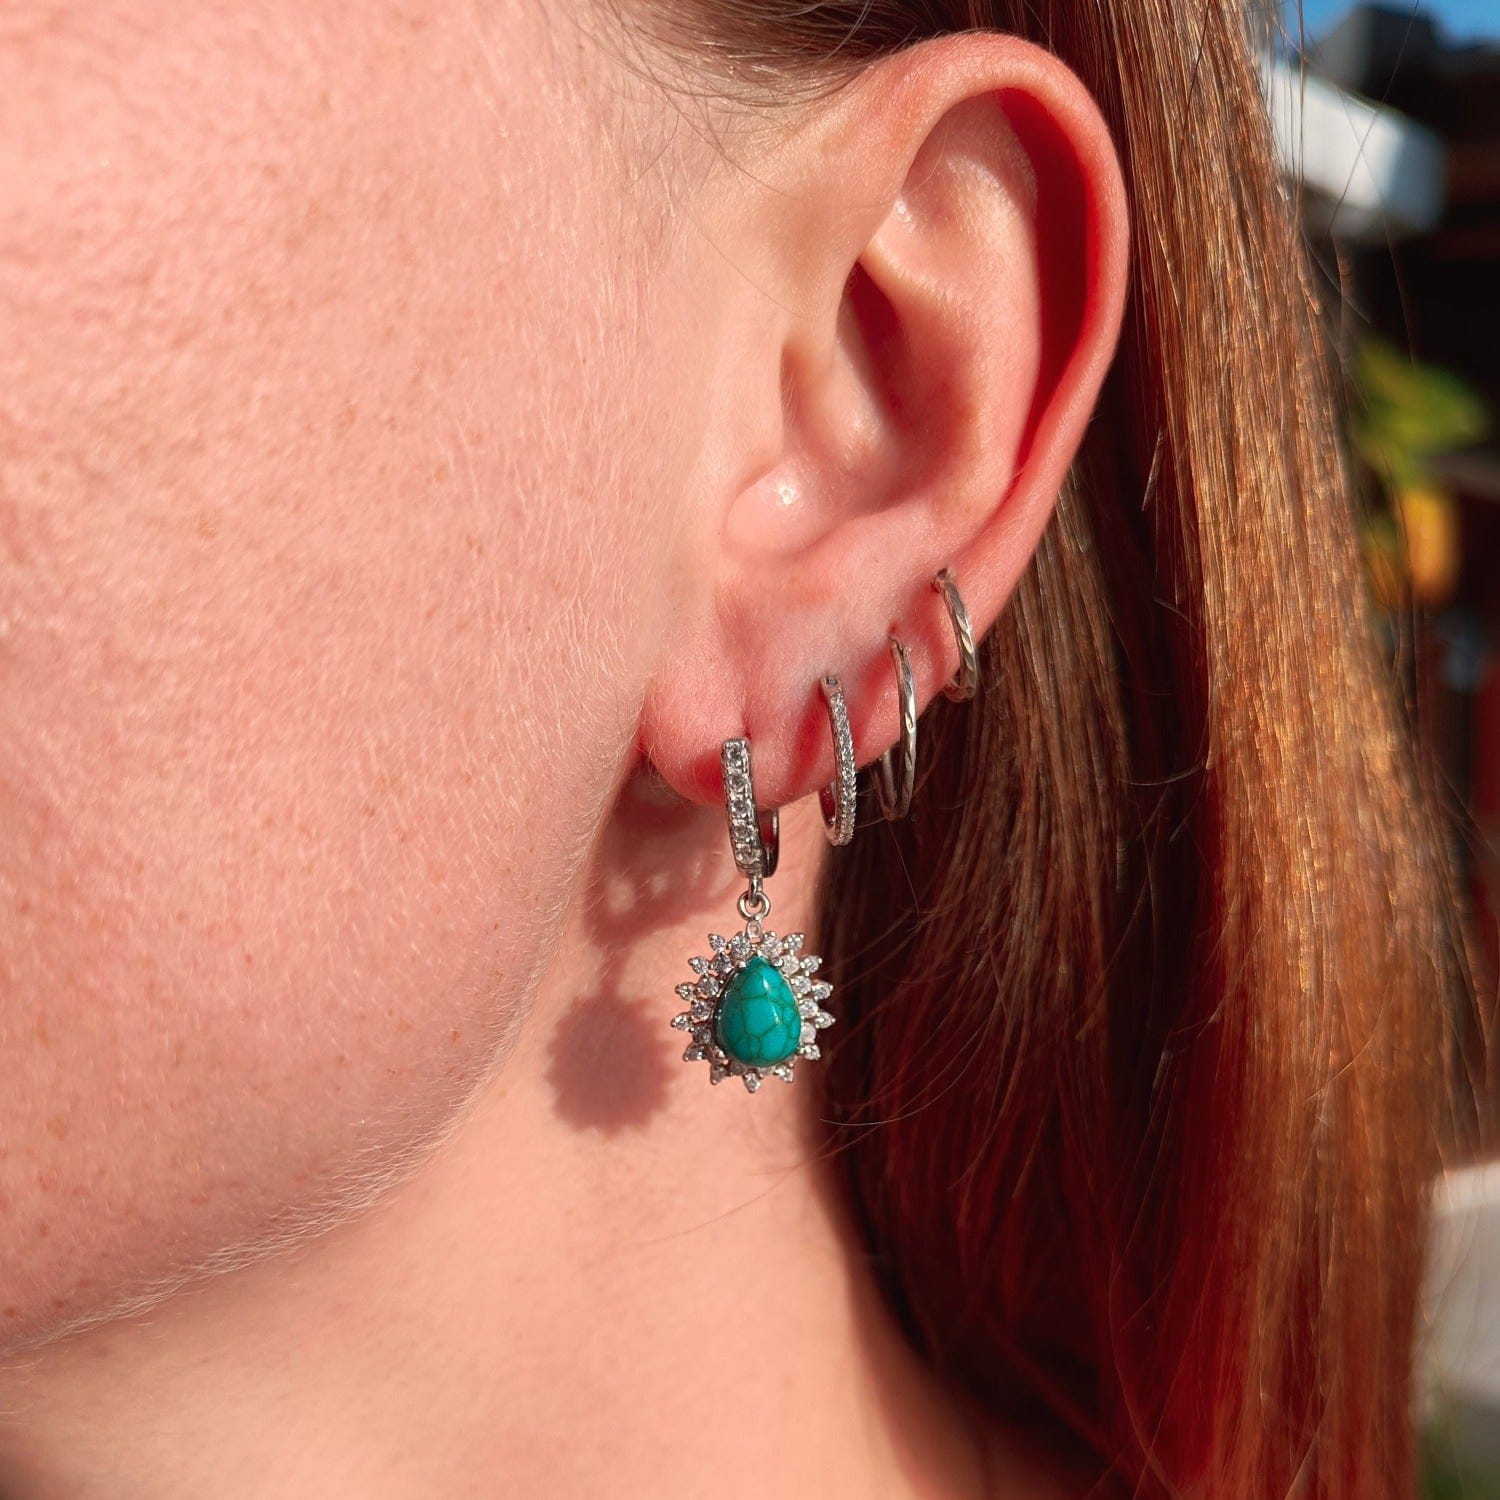 Blue Lagoon Turquoise Earrings featuring turquoise stones set in S925 sterling silver on a model in natural sunlight from the left ear